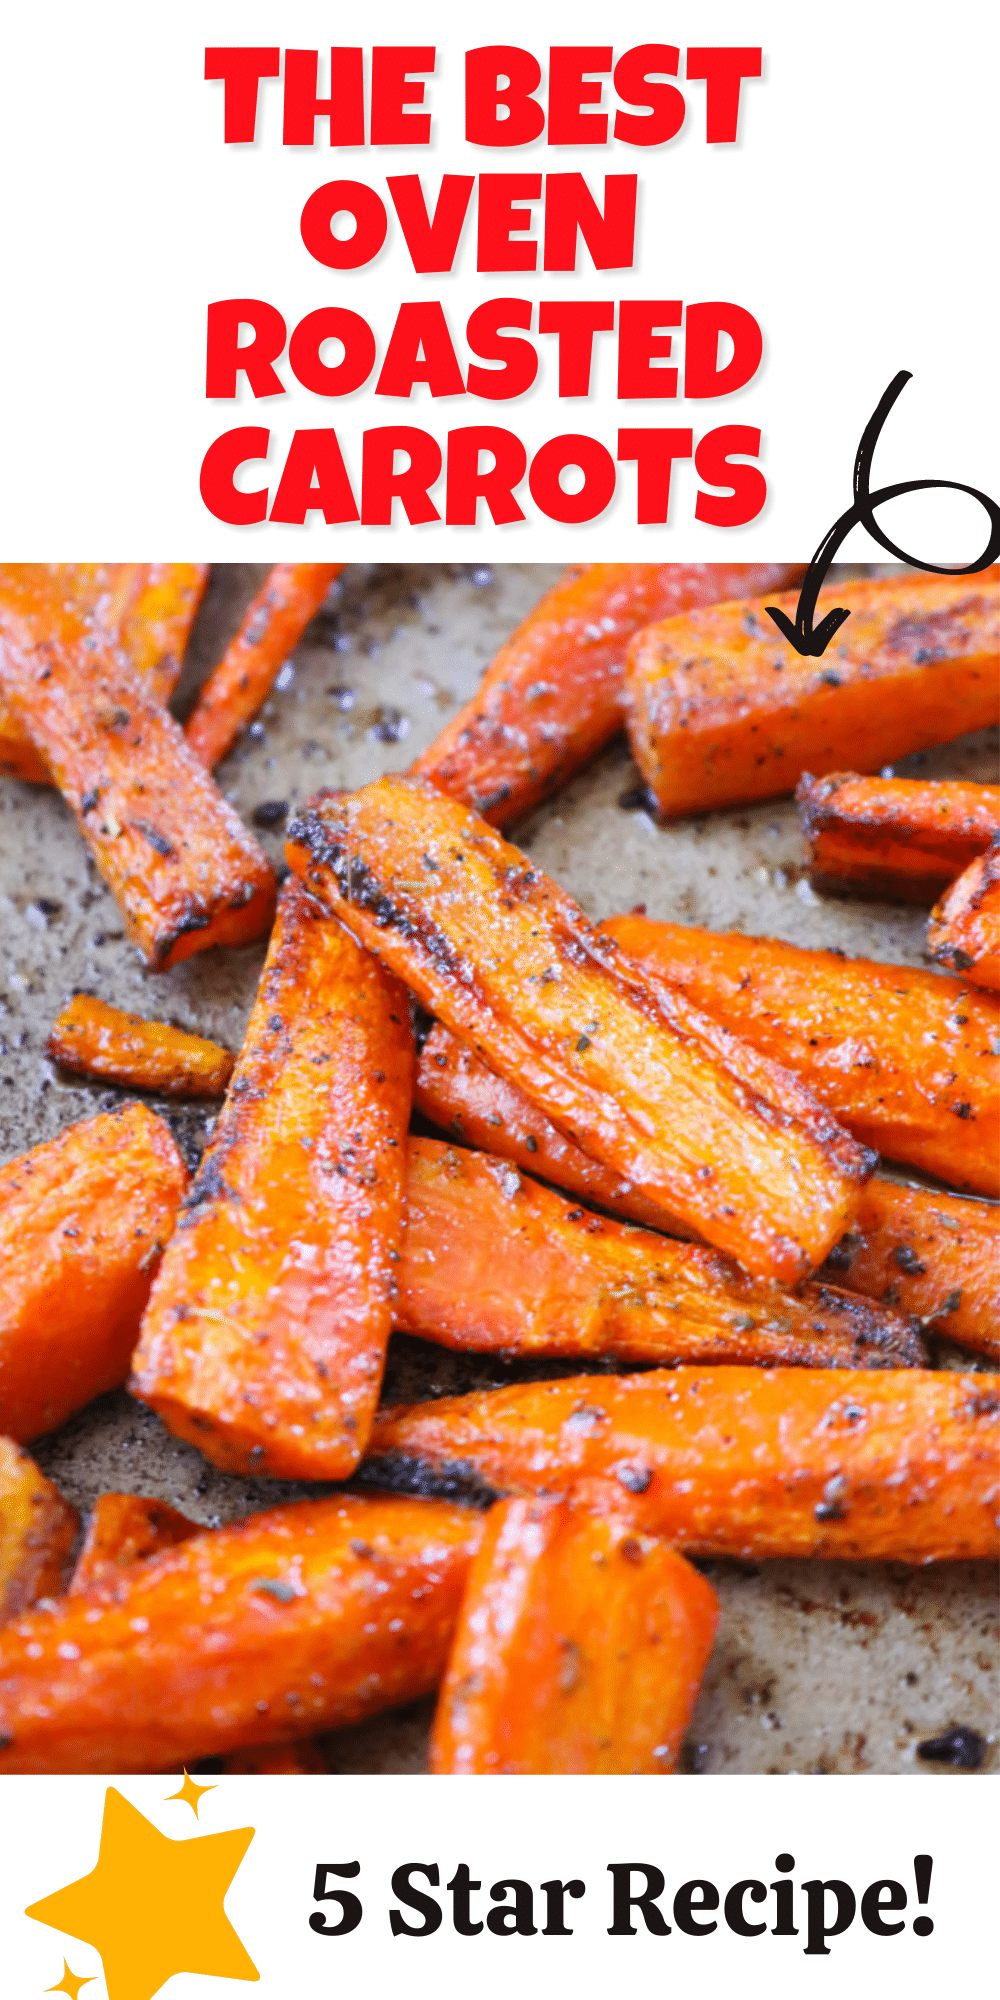 Oven Roasted Carrots make a great side dish that pairs perfect with almost any main course! These cooked carrots are oven roasted with a few seasonings and can be customized to use your favorites from the spice drawer! Ready in under 45 minutes and perfect for weeknights, weekends and meal prep! 

 via @bigbearswife